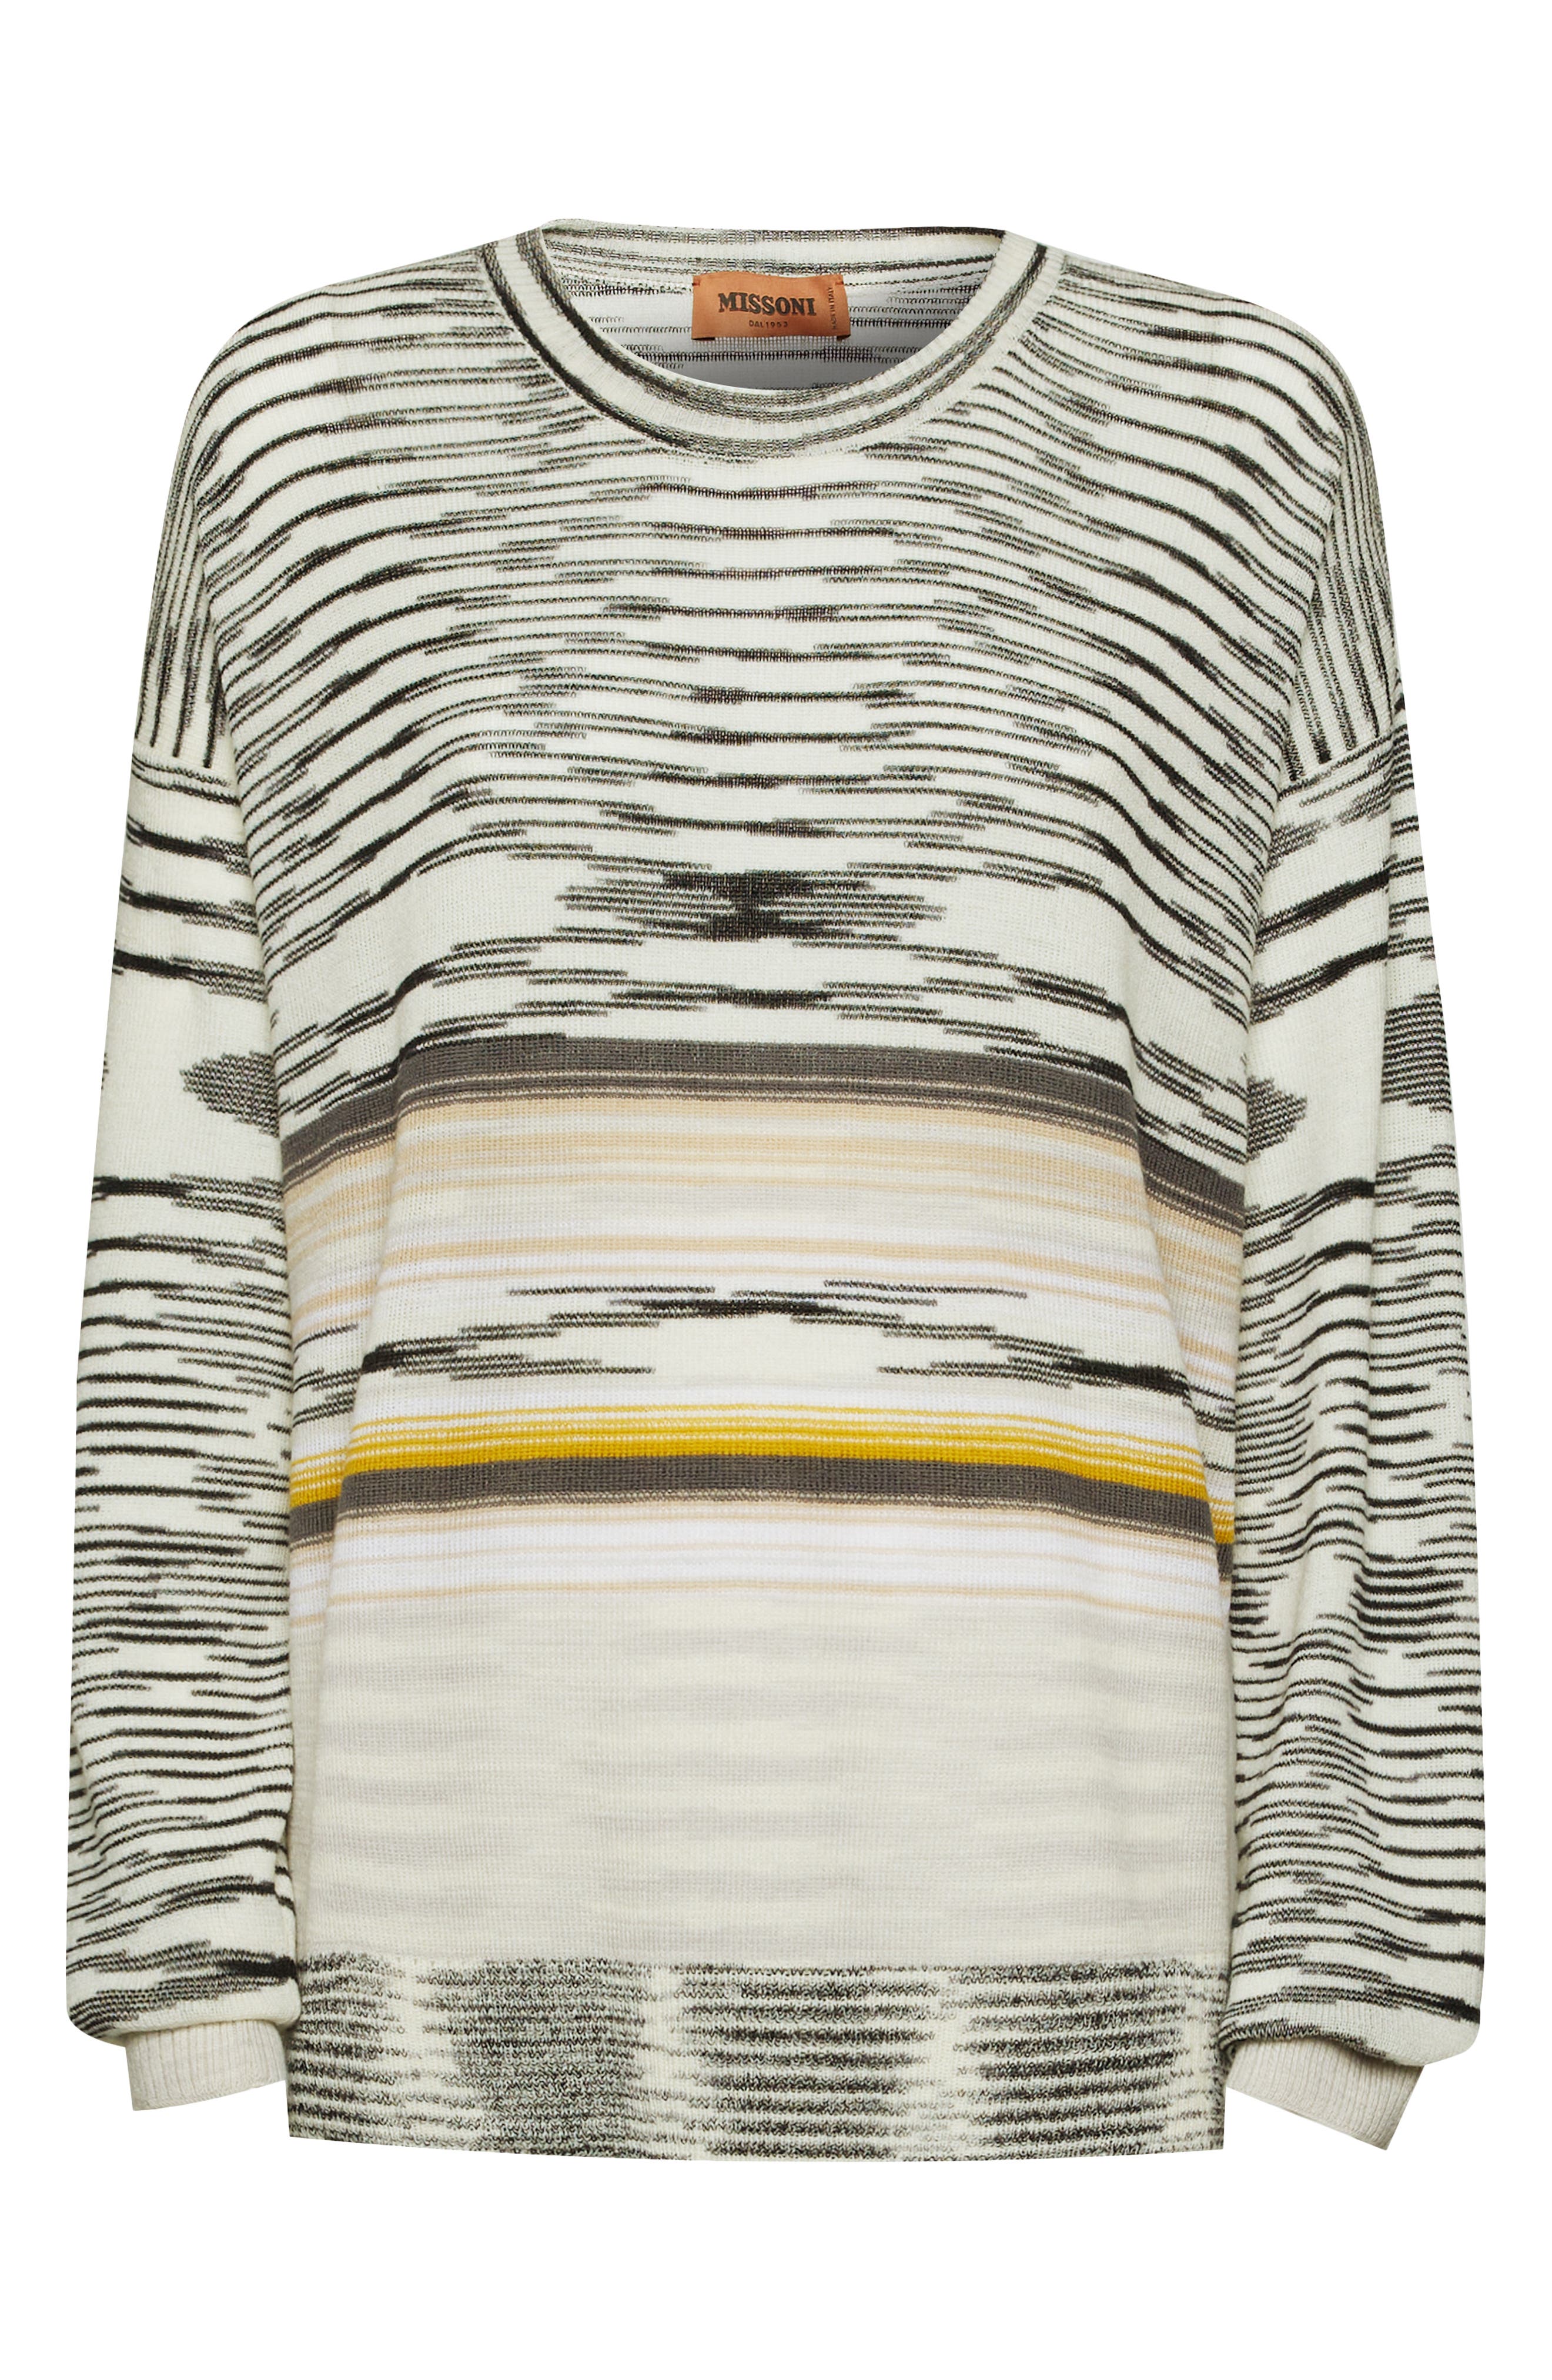 Missoni Space Dye Wool Sweater in White/Grey/Black at Nordstrom, Size X-Small